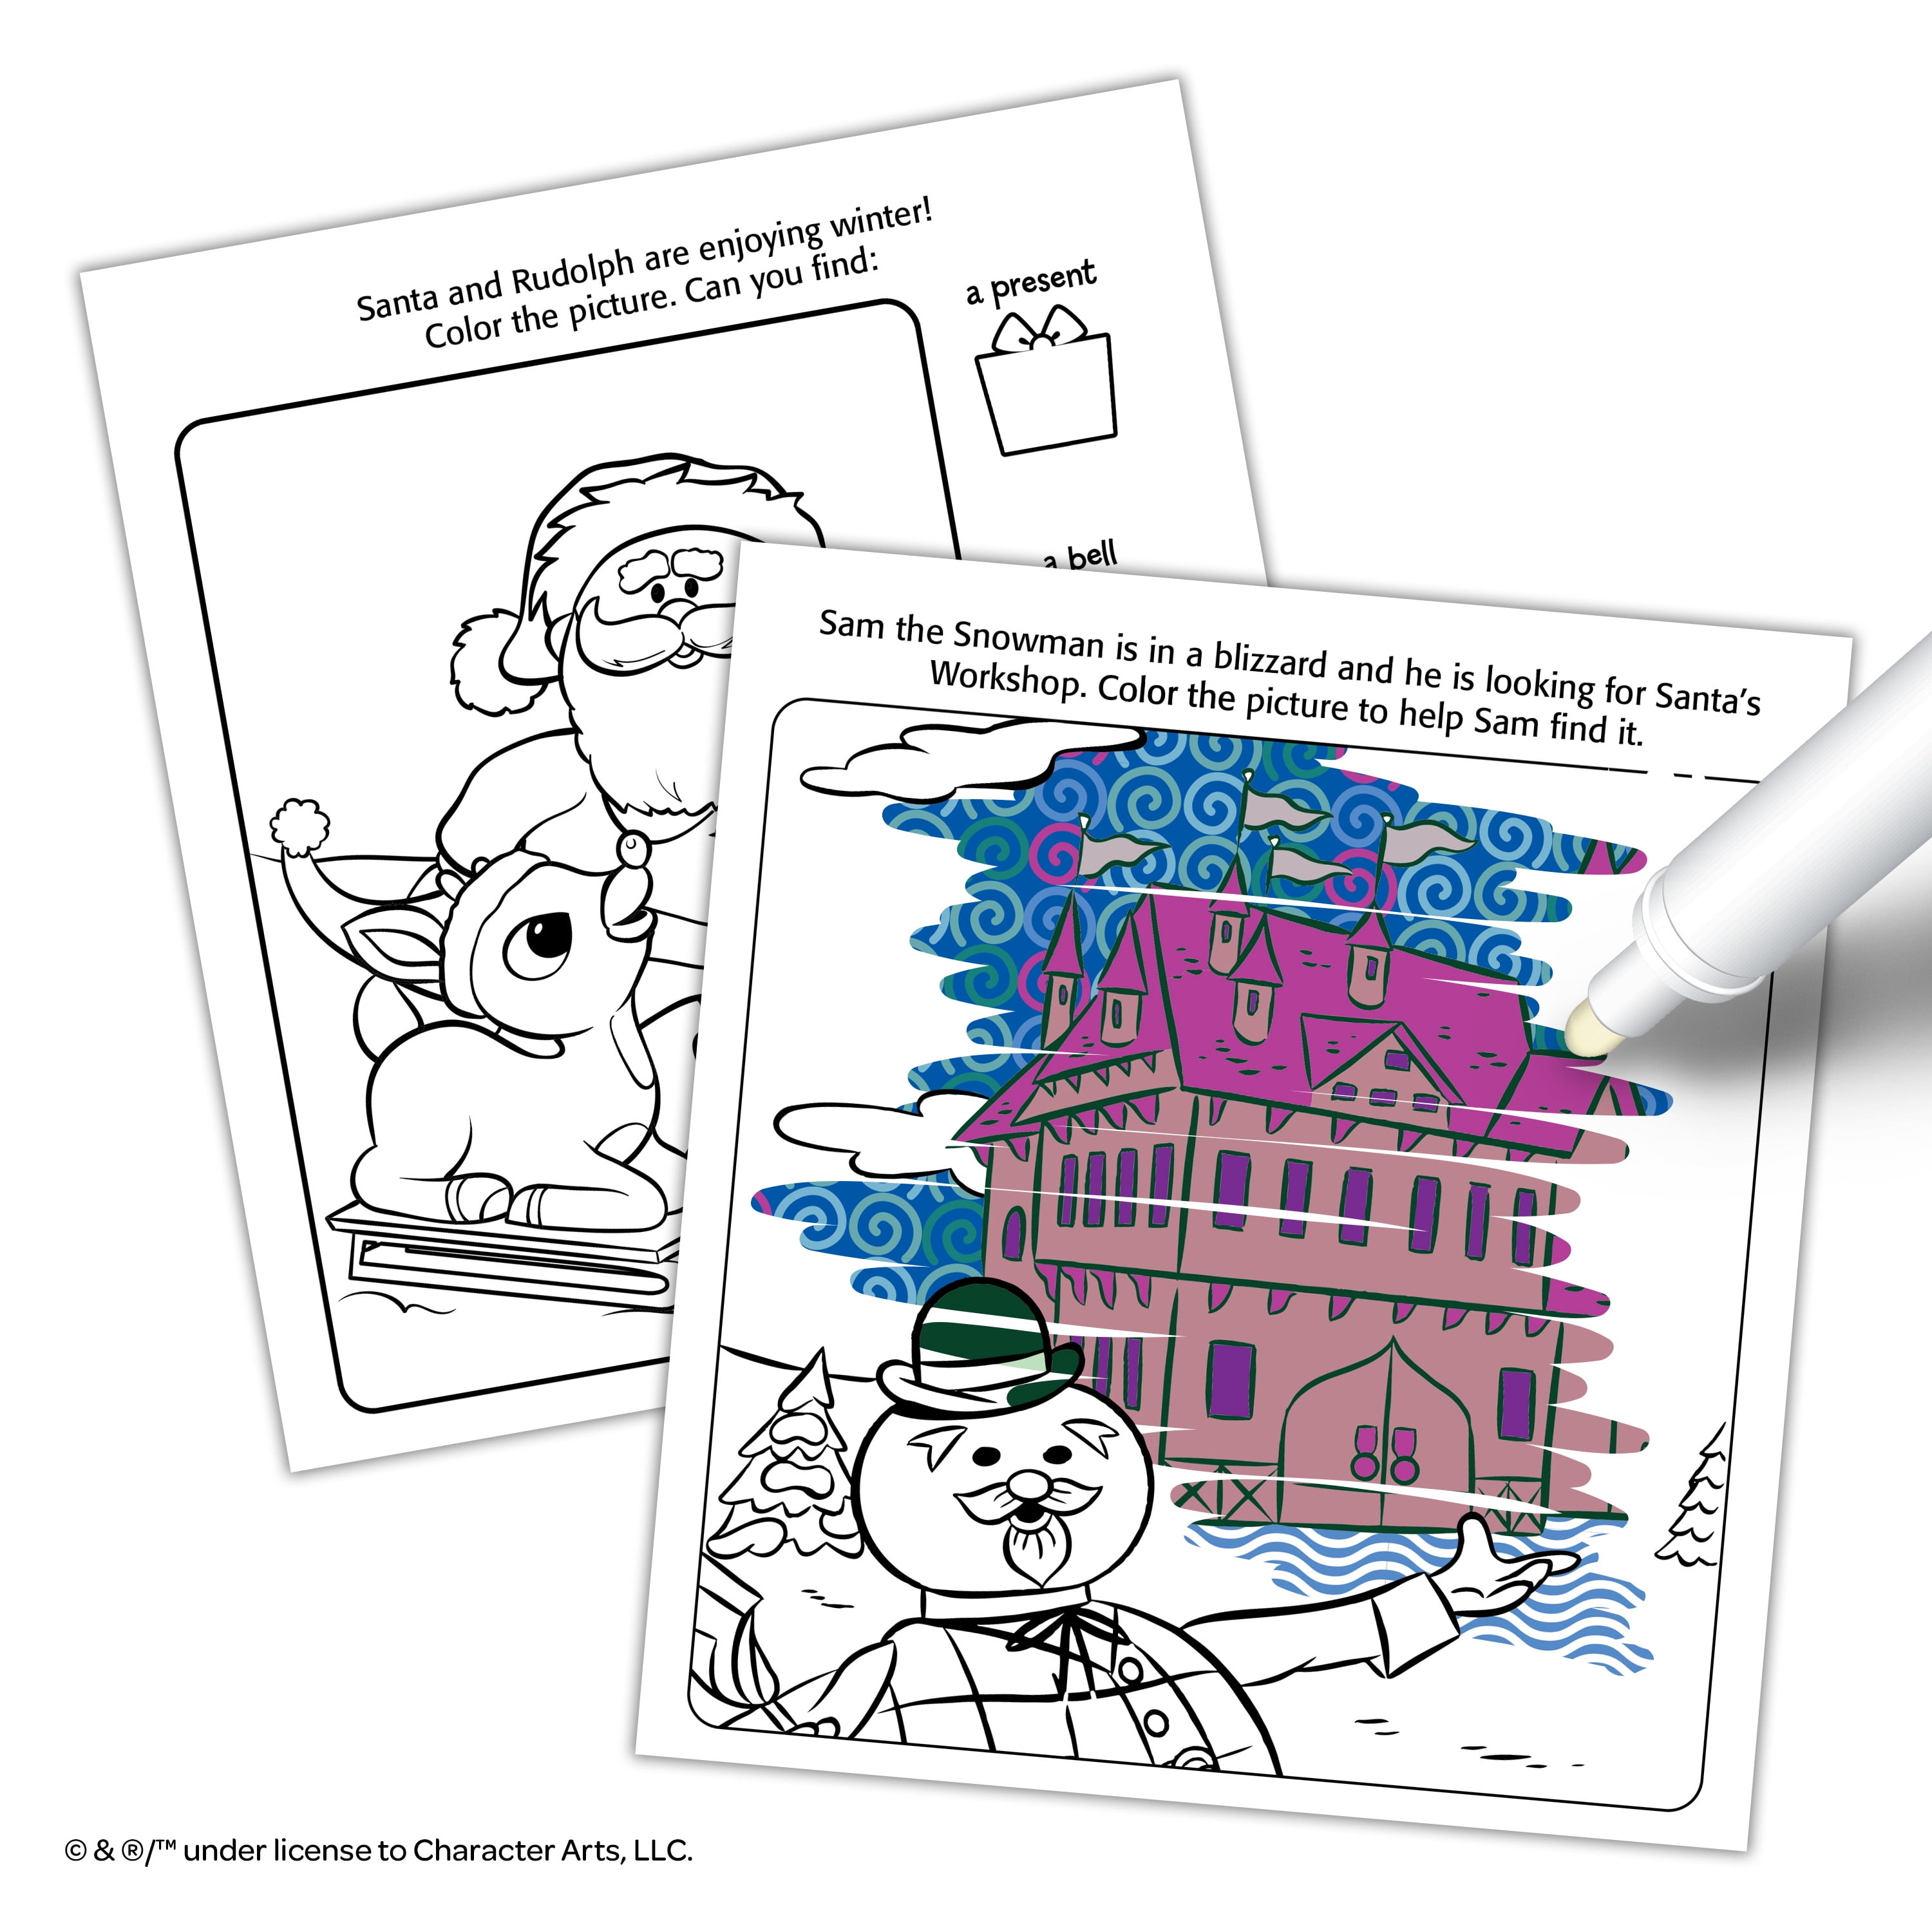 imagine ink® magic ink pictures mess-free coloring book